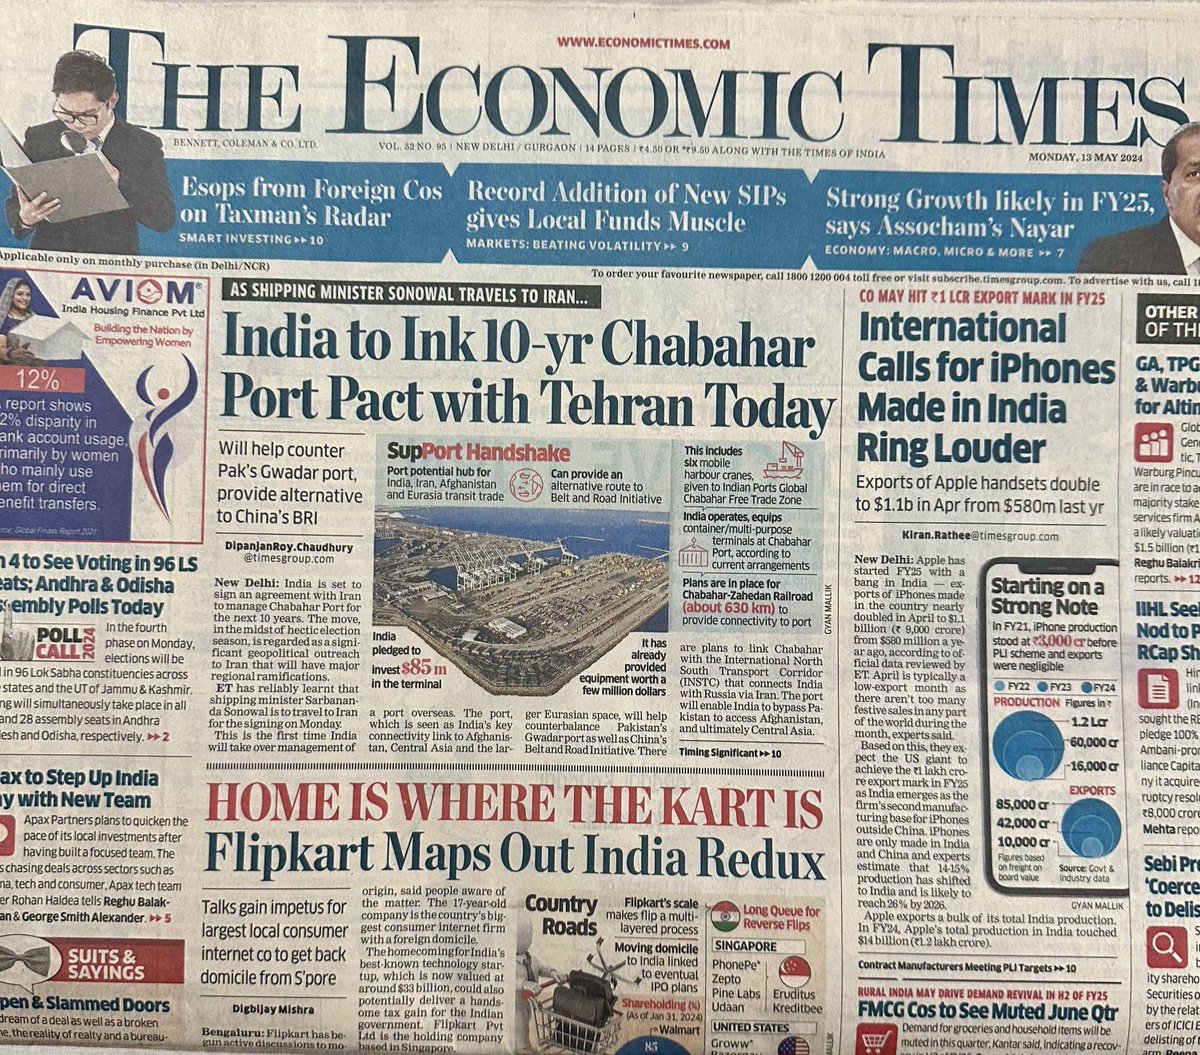 In a big outreach to Iran & Eurasia, India & Tehran is all set to sign a pact today for management of Chabahar Port for 10 years by Delhi. Timing is significant amid Lok Sabha polls as Shipping Minister flies to Iran — My report ⁦@ETPolitics⁩ ⁦@pranabsamanta⁩